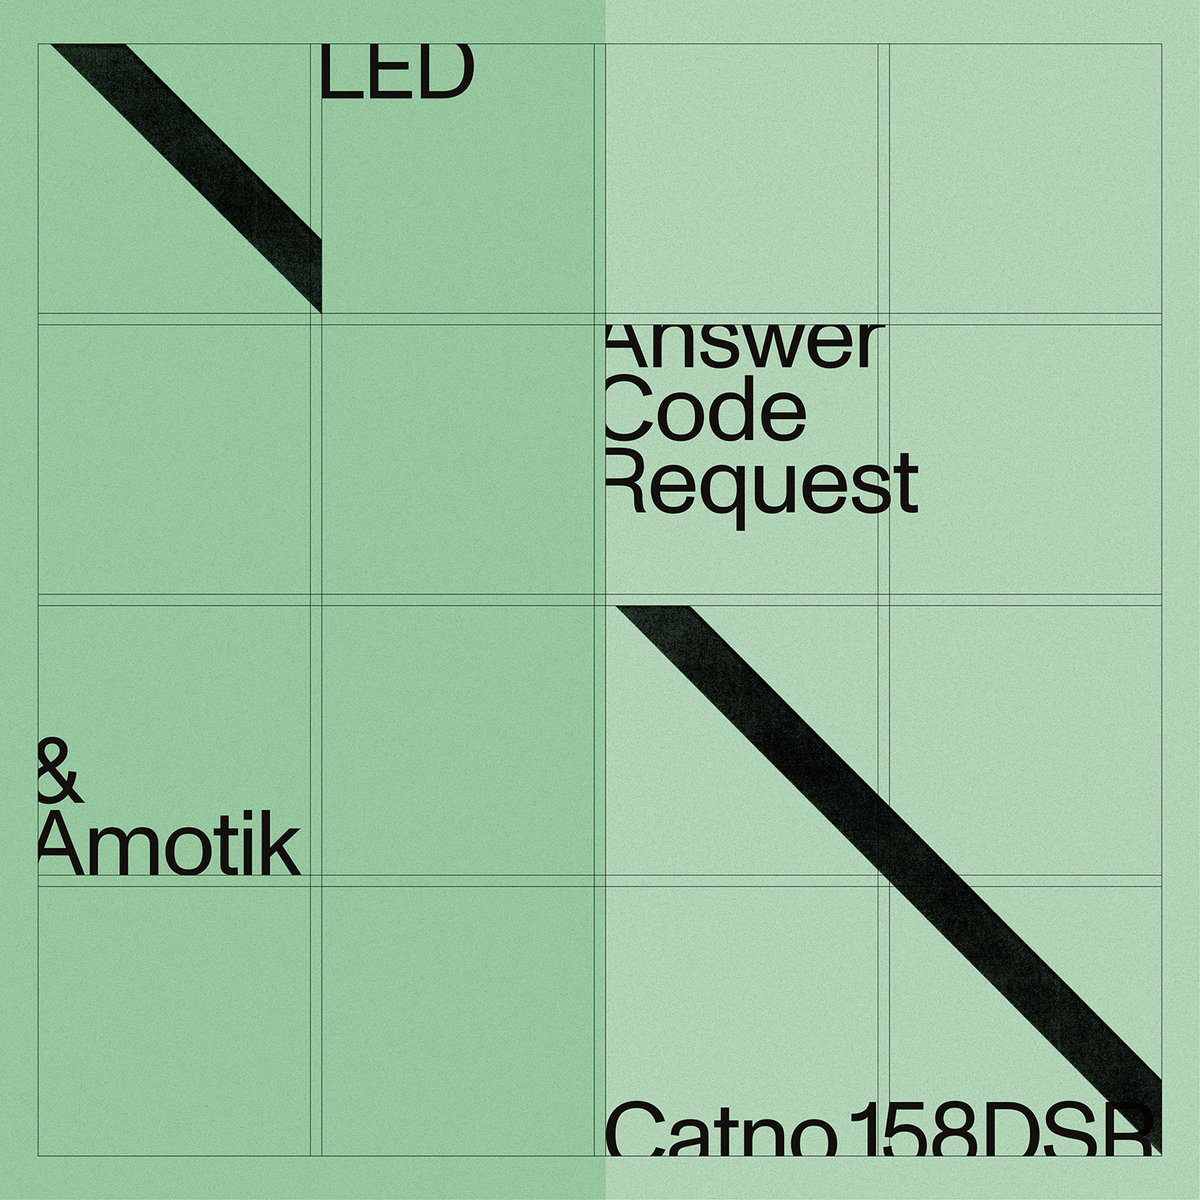 Answer Code Request & Amotik – LED